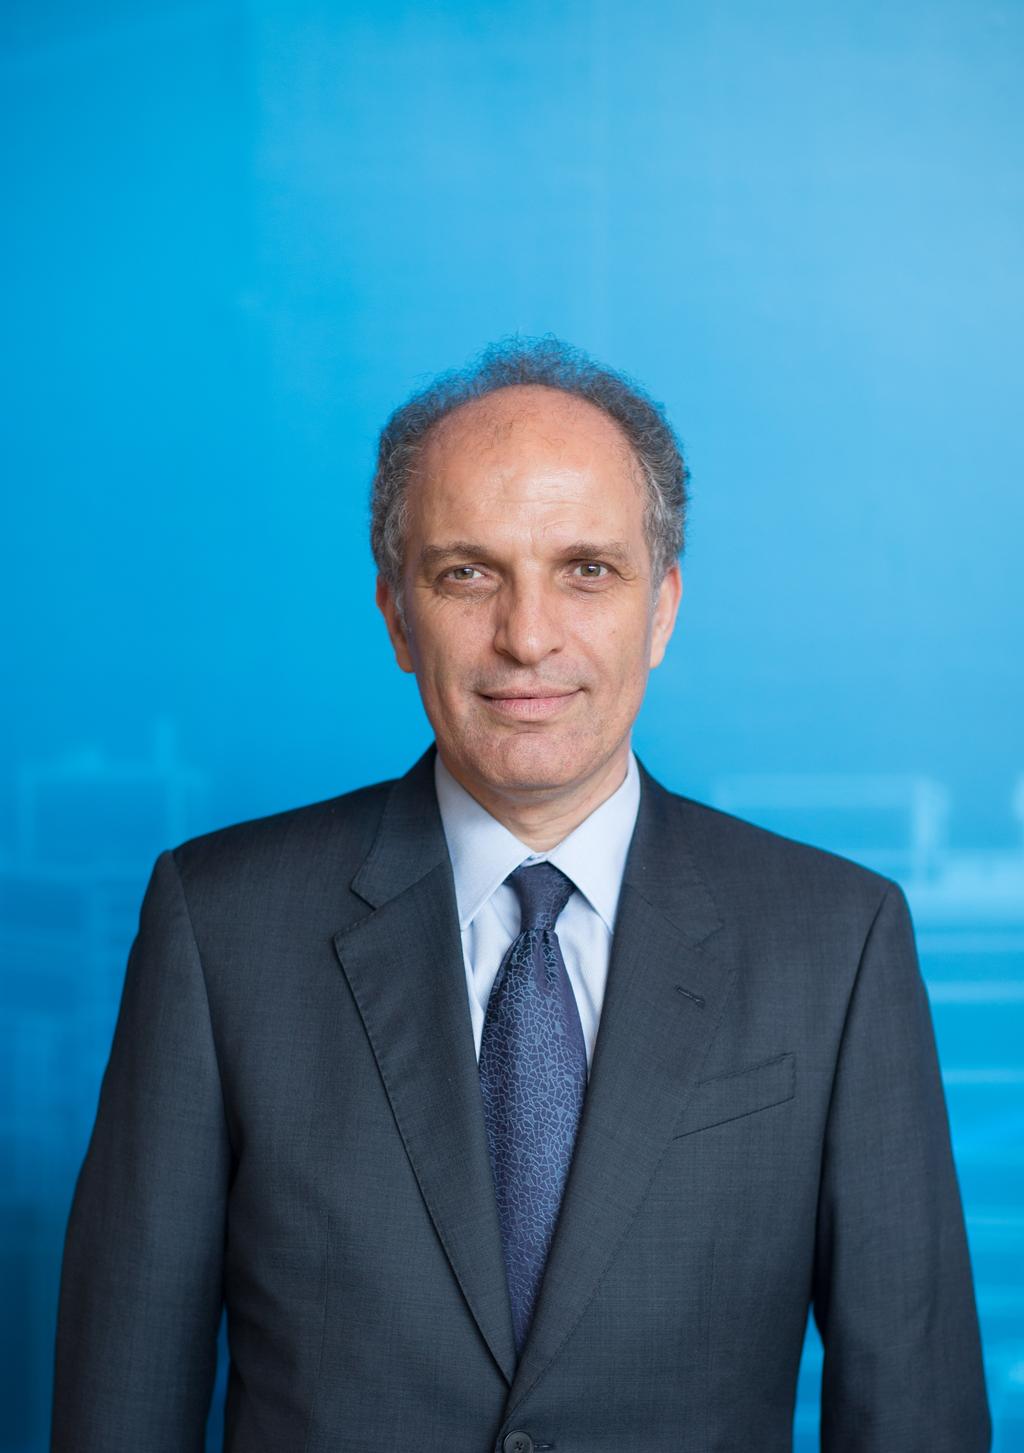 Speaker Profiles Dr Samir Hamrouni, CEO World Free Zones Organization (World FZO) Dr. Samir Hamrouni is CEO of the World Free Zones Organization. In this role he reports to the Chairman, Dr.